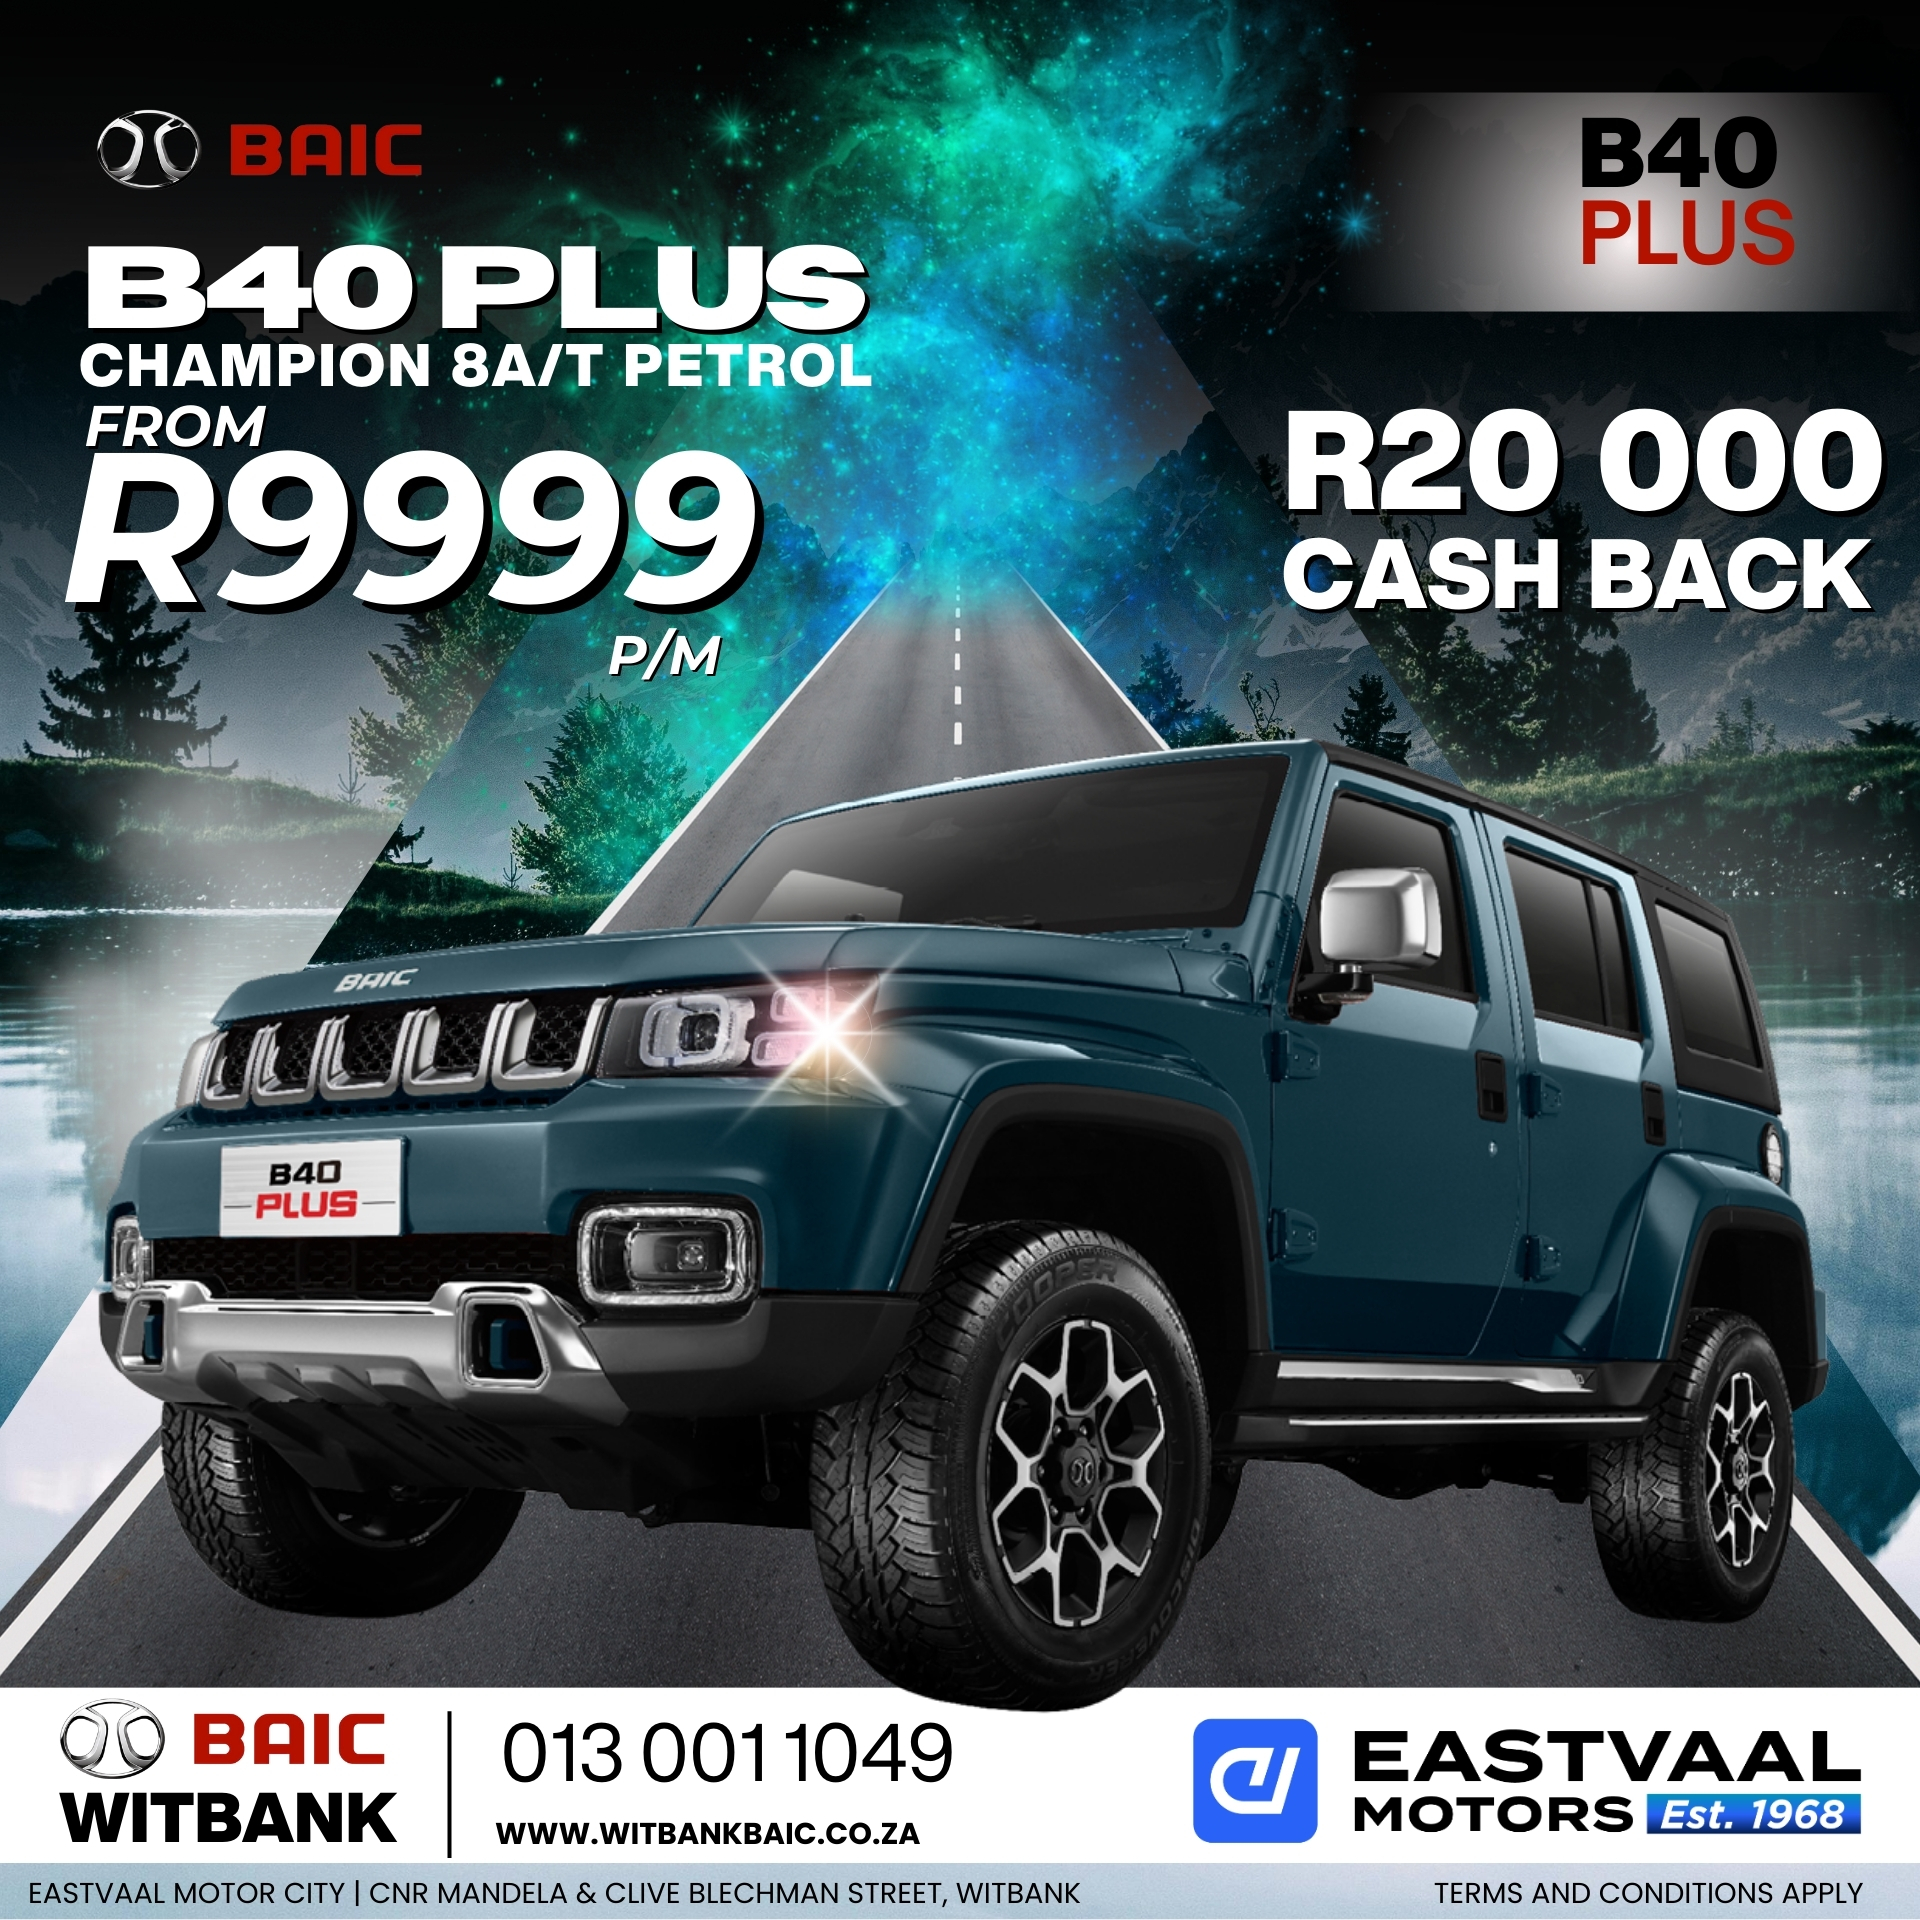 Upgrade your ride this July with BAIC from Eastvaal Motor City. Drive home in style and comfort! image from Eastvaal Motors